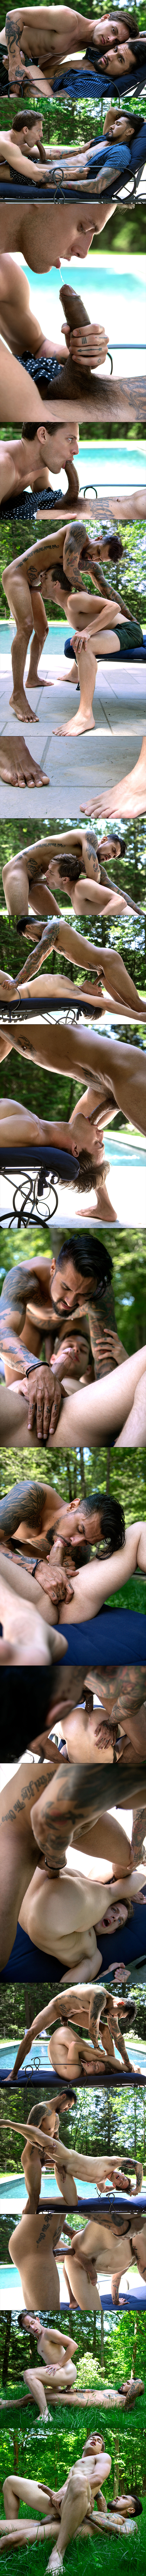 Cockyboys Boomer Banks & Tayte Hanson Huge Mexican Dick Outdoor sex Uncut Cock Male Feet